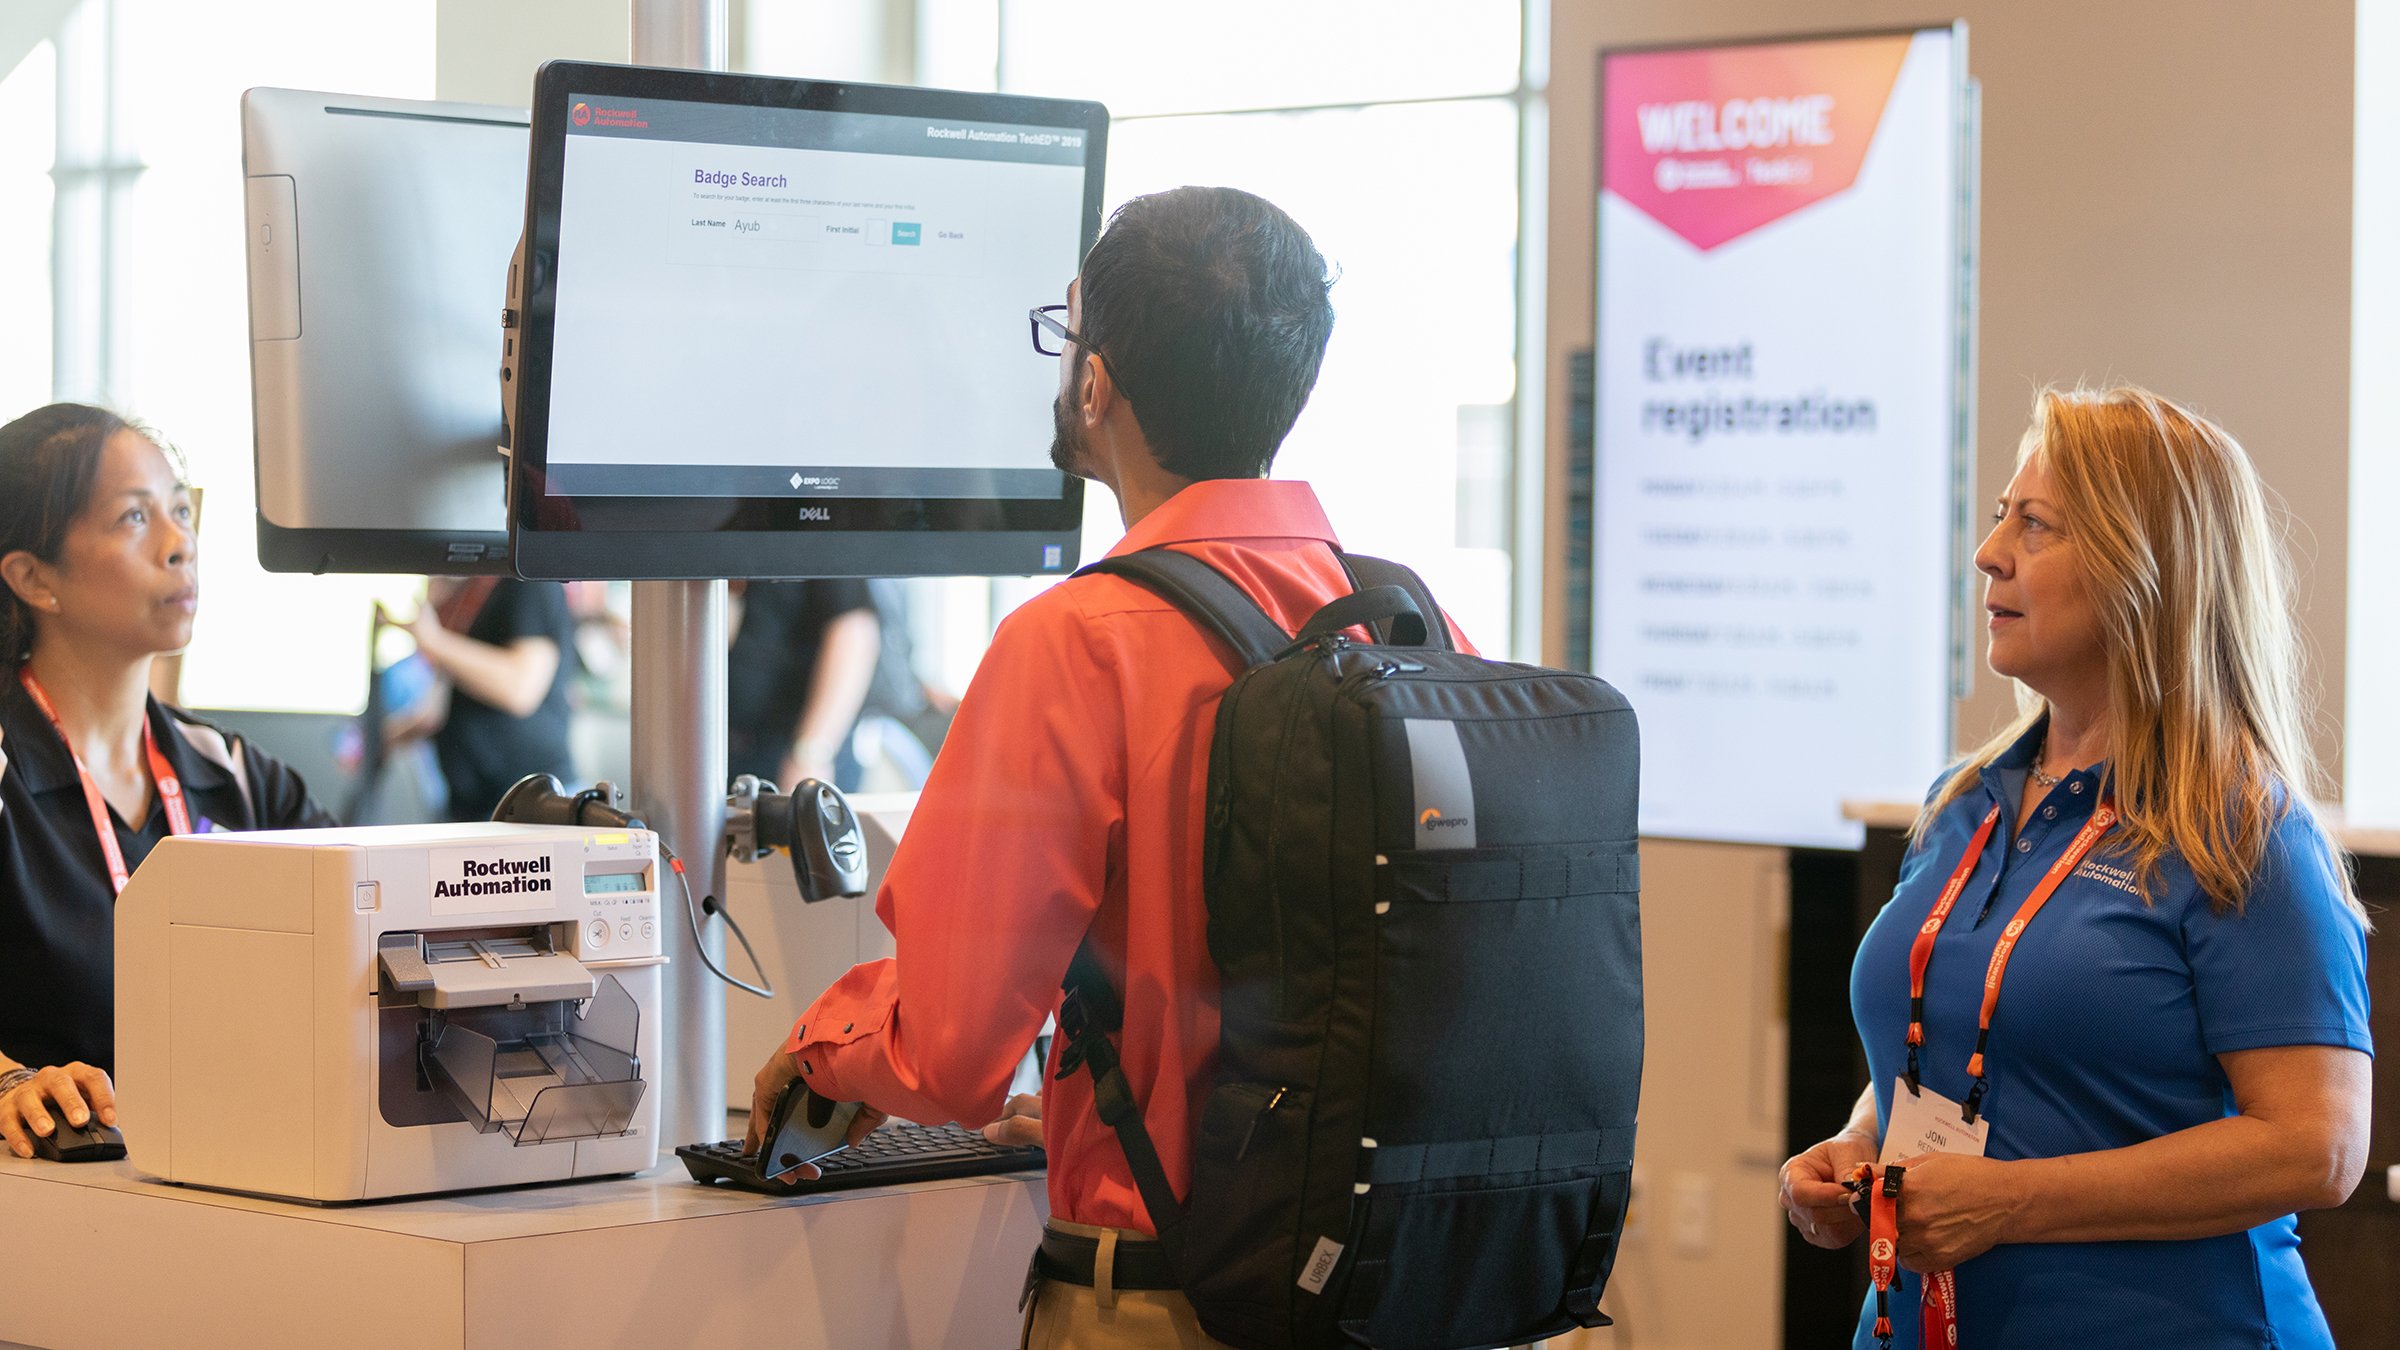 Customer using a registration kiosk to complete their registration to attend a Rockwell Automation event.